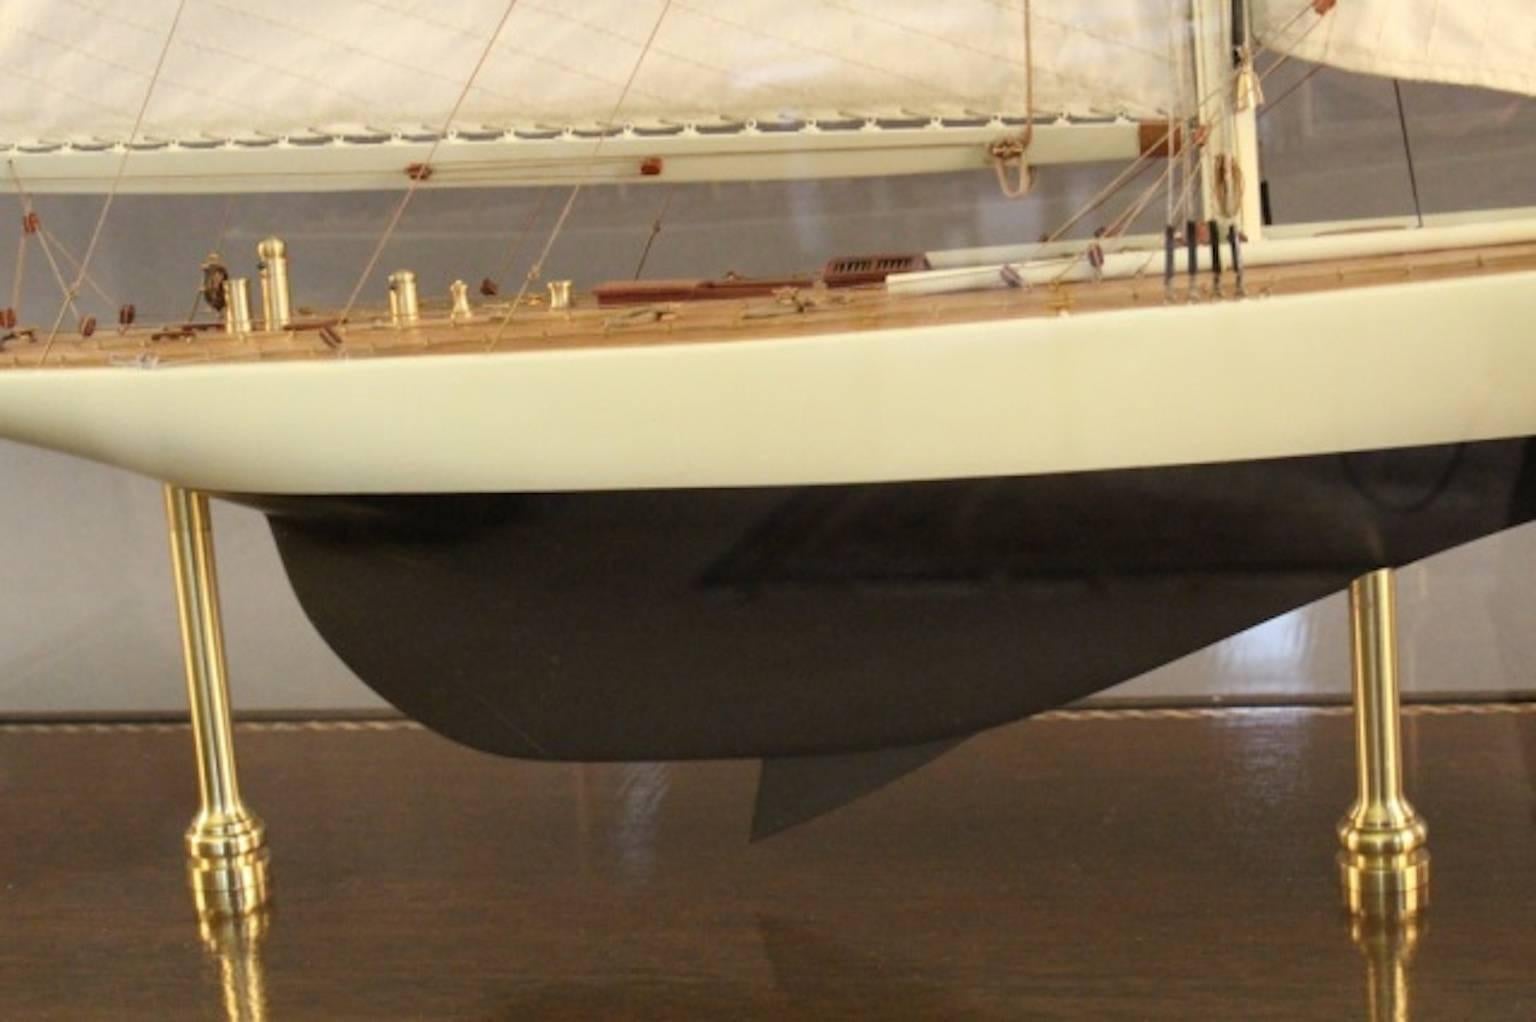 Highly detailed model of the 1930 America’s Cup yacht “Enterprise." Brass deck fittings include binnacles, cleats, winch, capstan, helm stand with carved wheel, skylights, hatches, and rope coils. Rigged with a full suit of sails and displayed